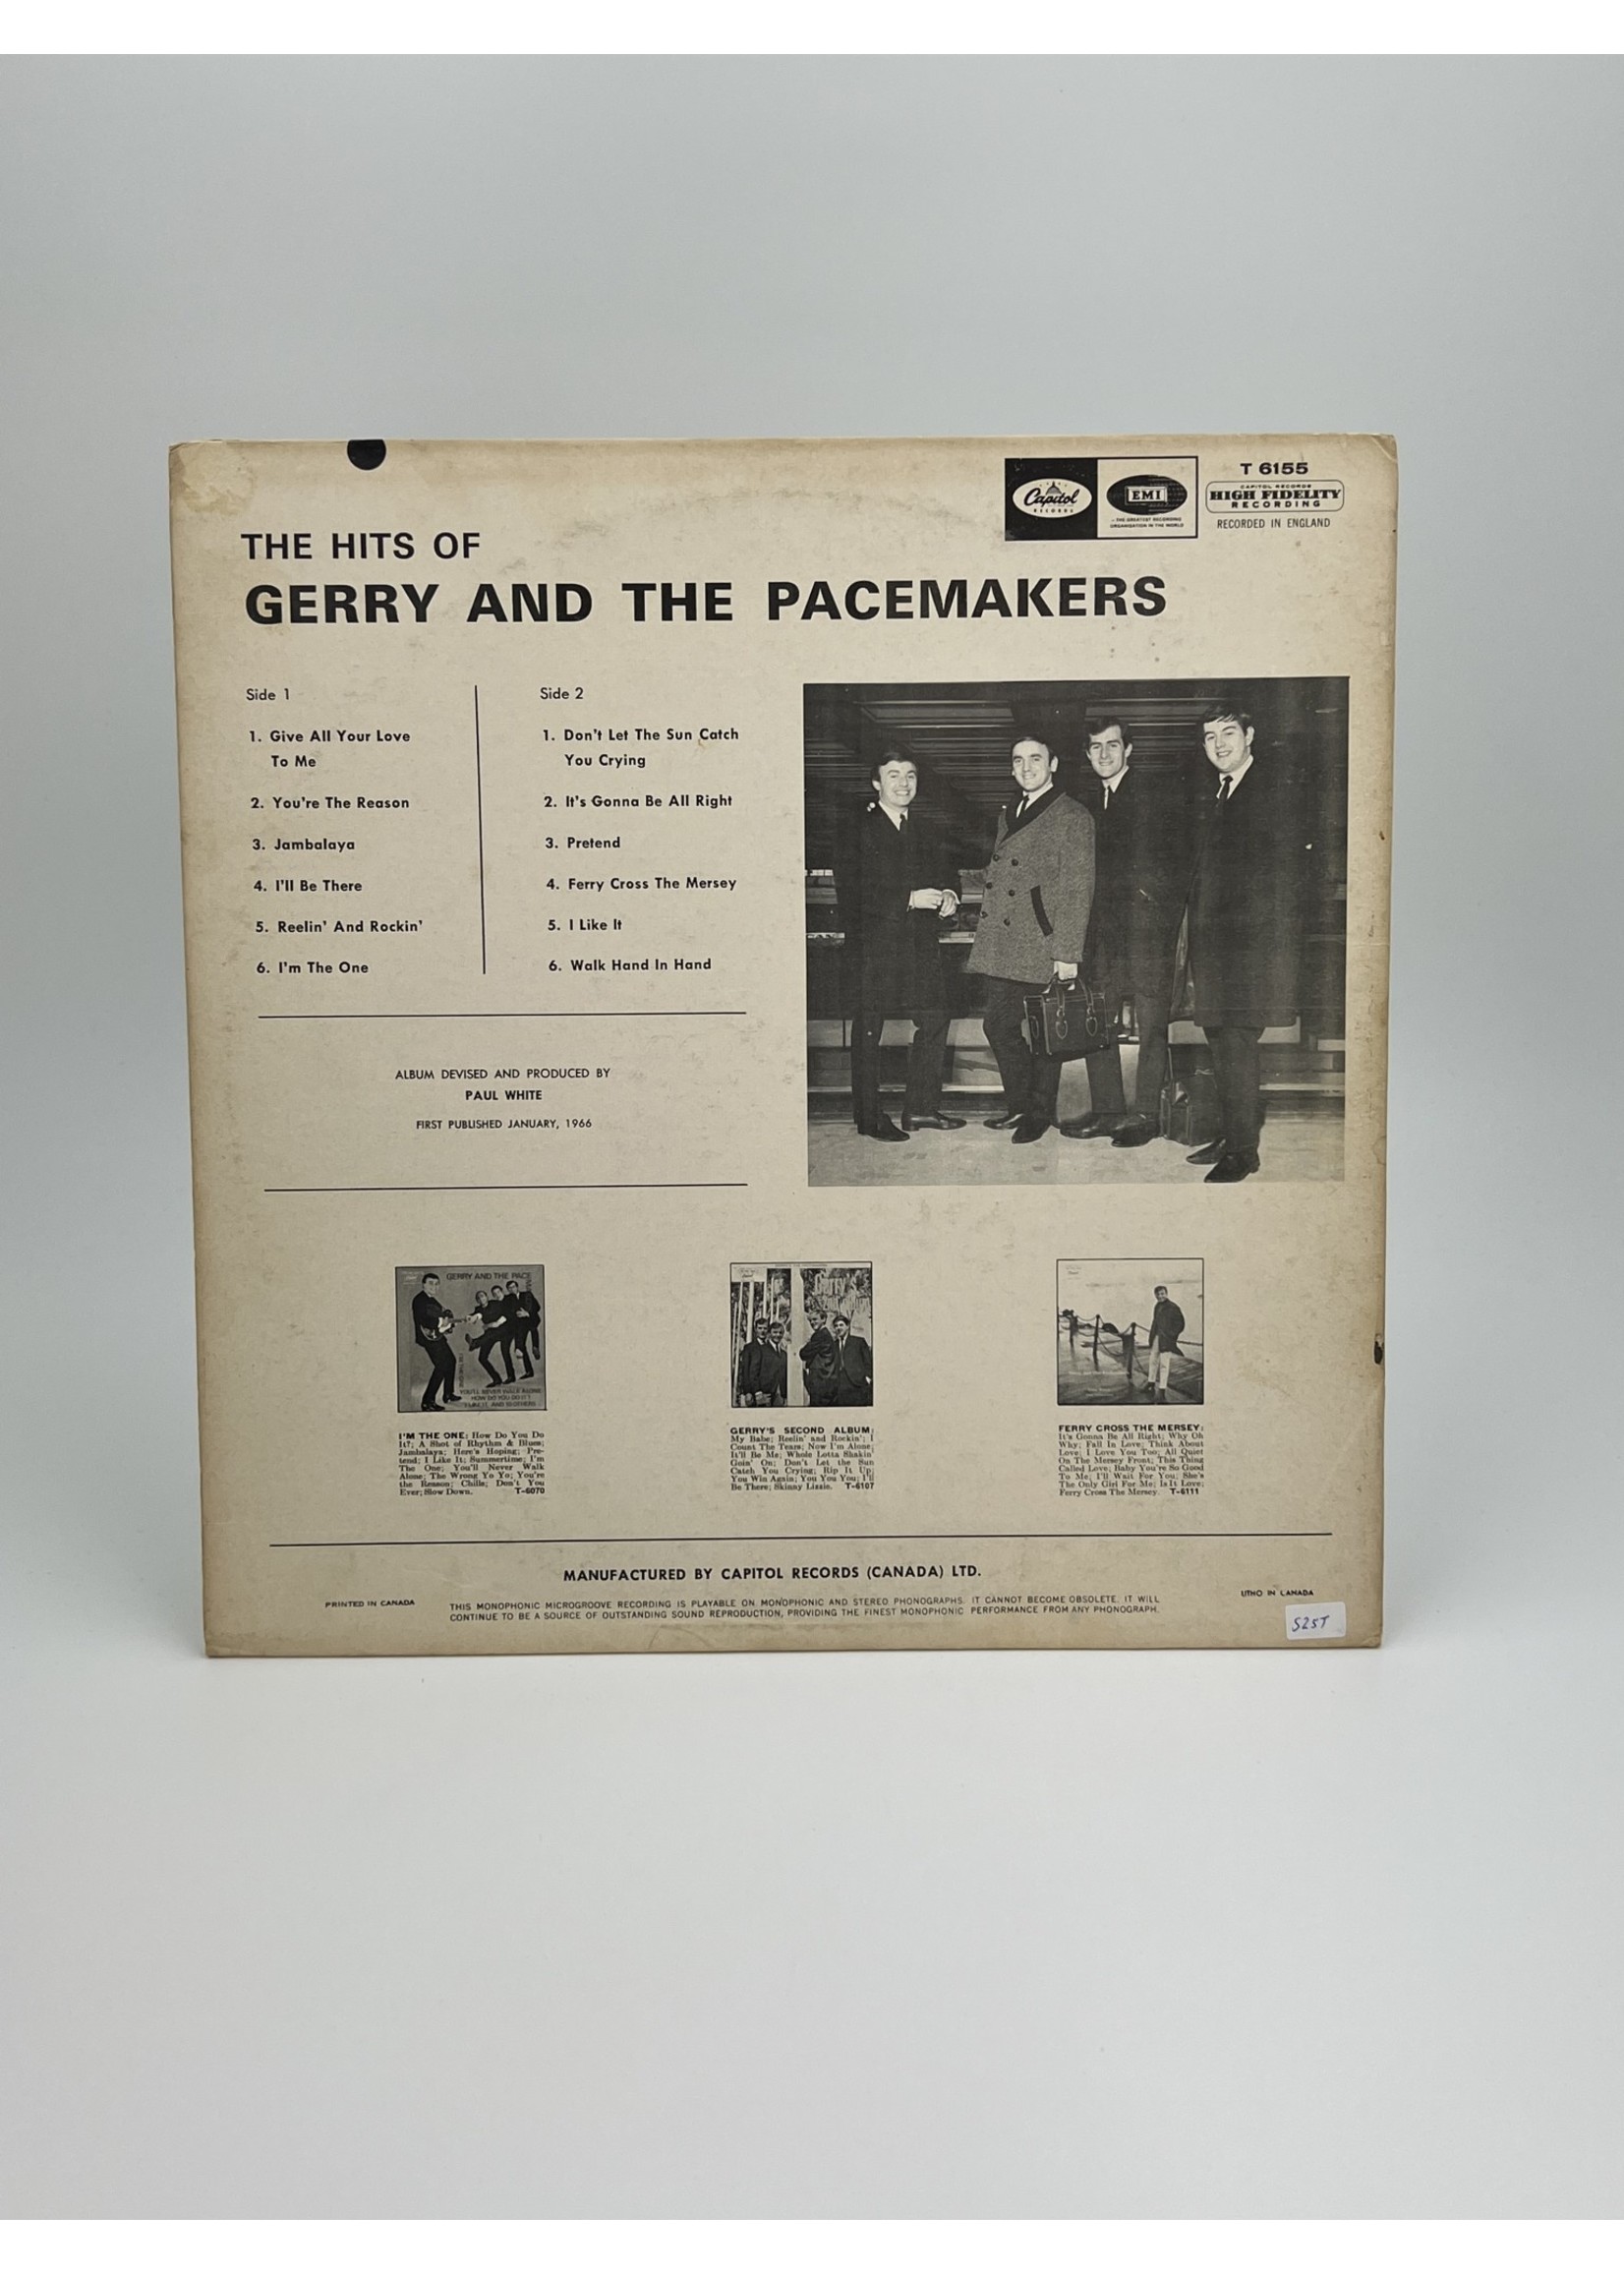 LP The Hits of Gerry and the Pacemakers LP Record